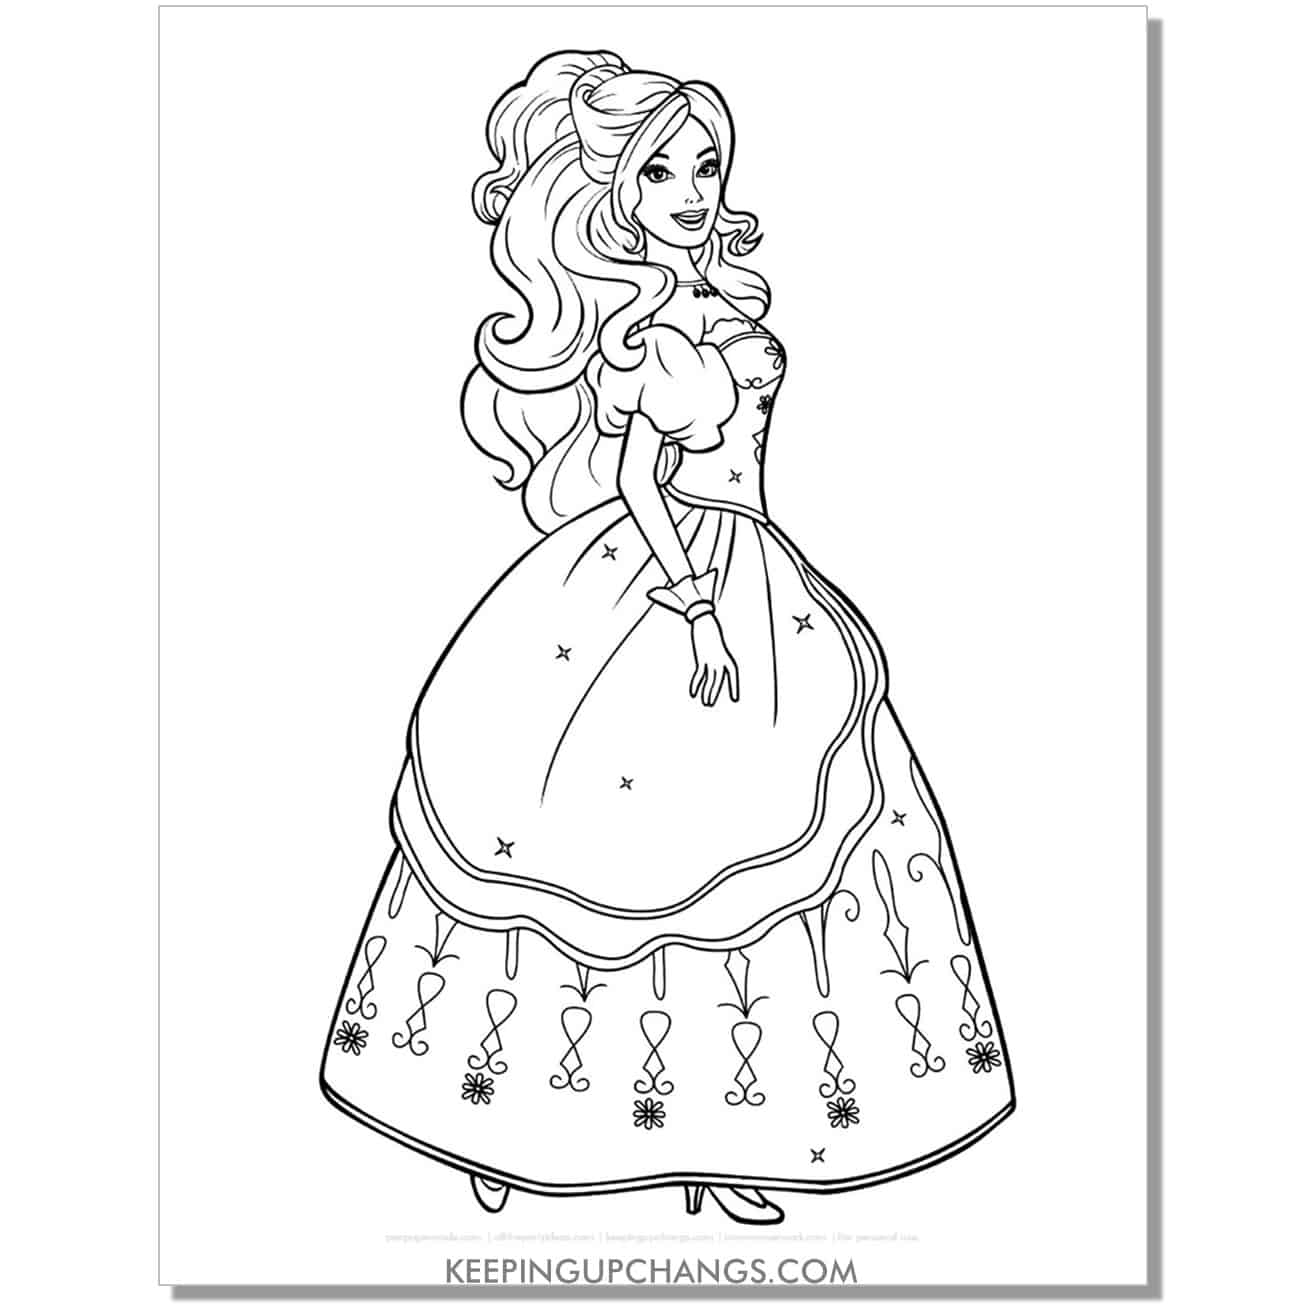 barbie standing in poofy princess gown coloring page.